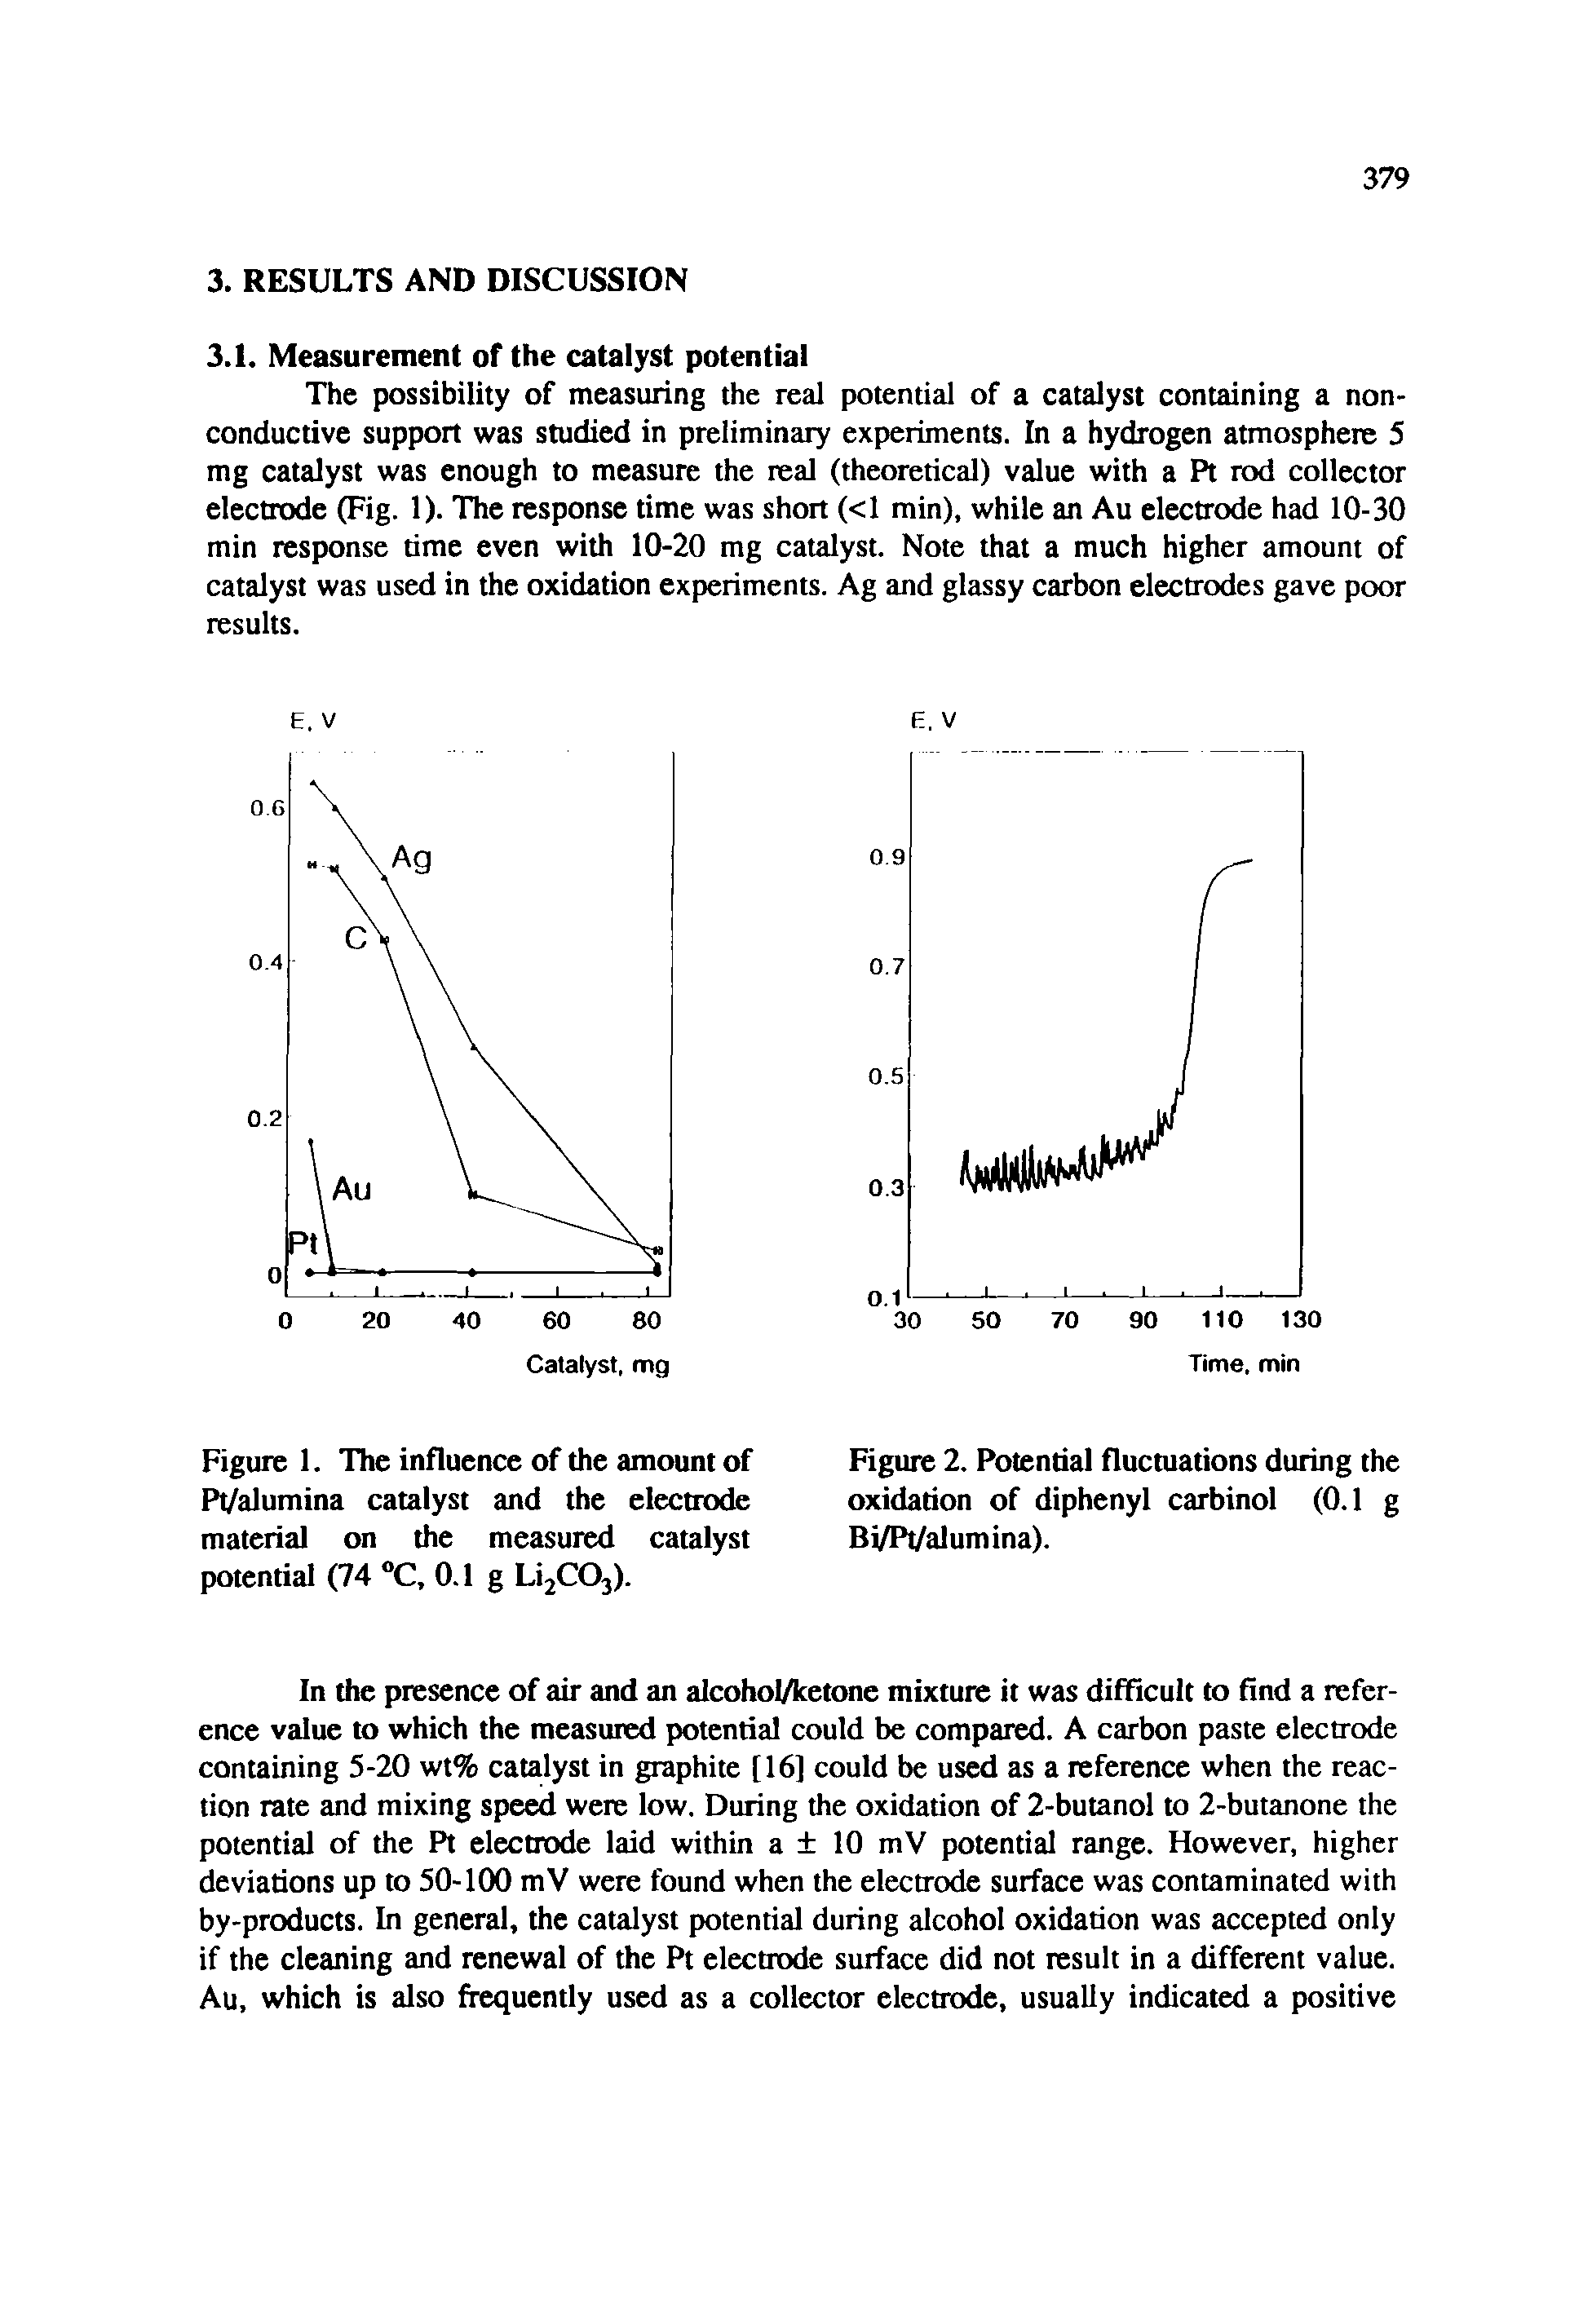 Figure 2. Potential fluctuations during the oxidation of diphenyl carbinol (0.1 g Bi/Pi/alumina).